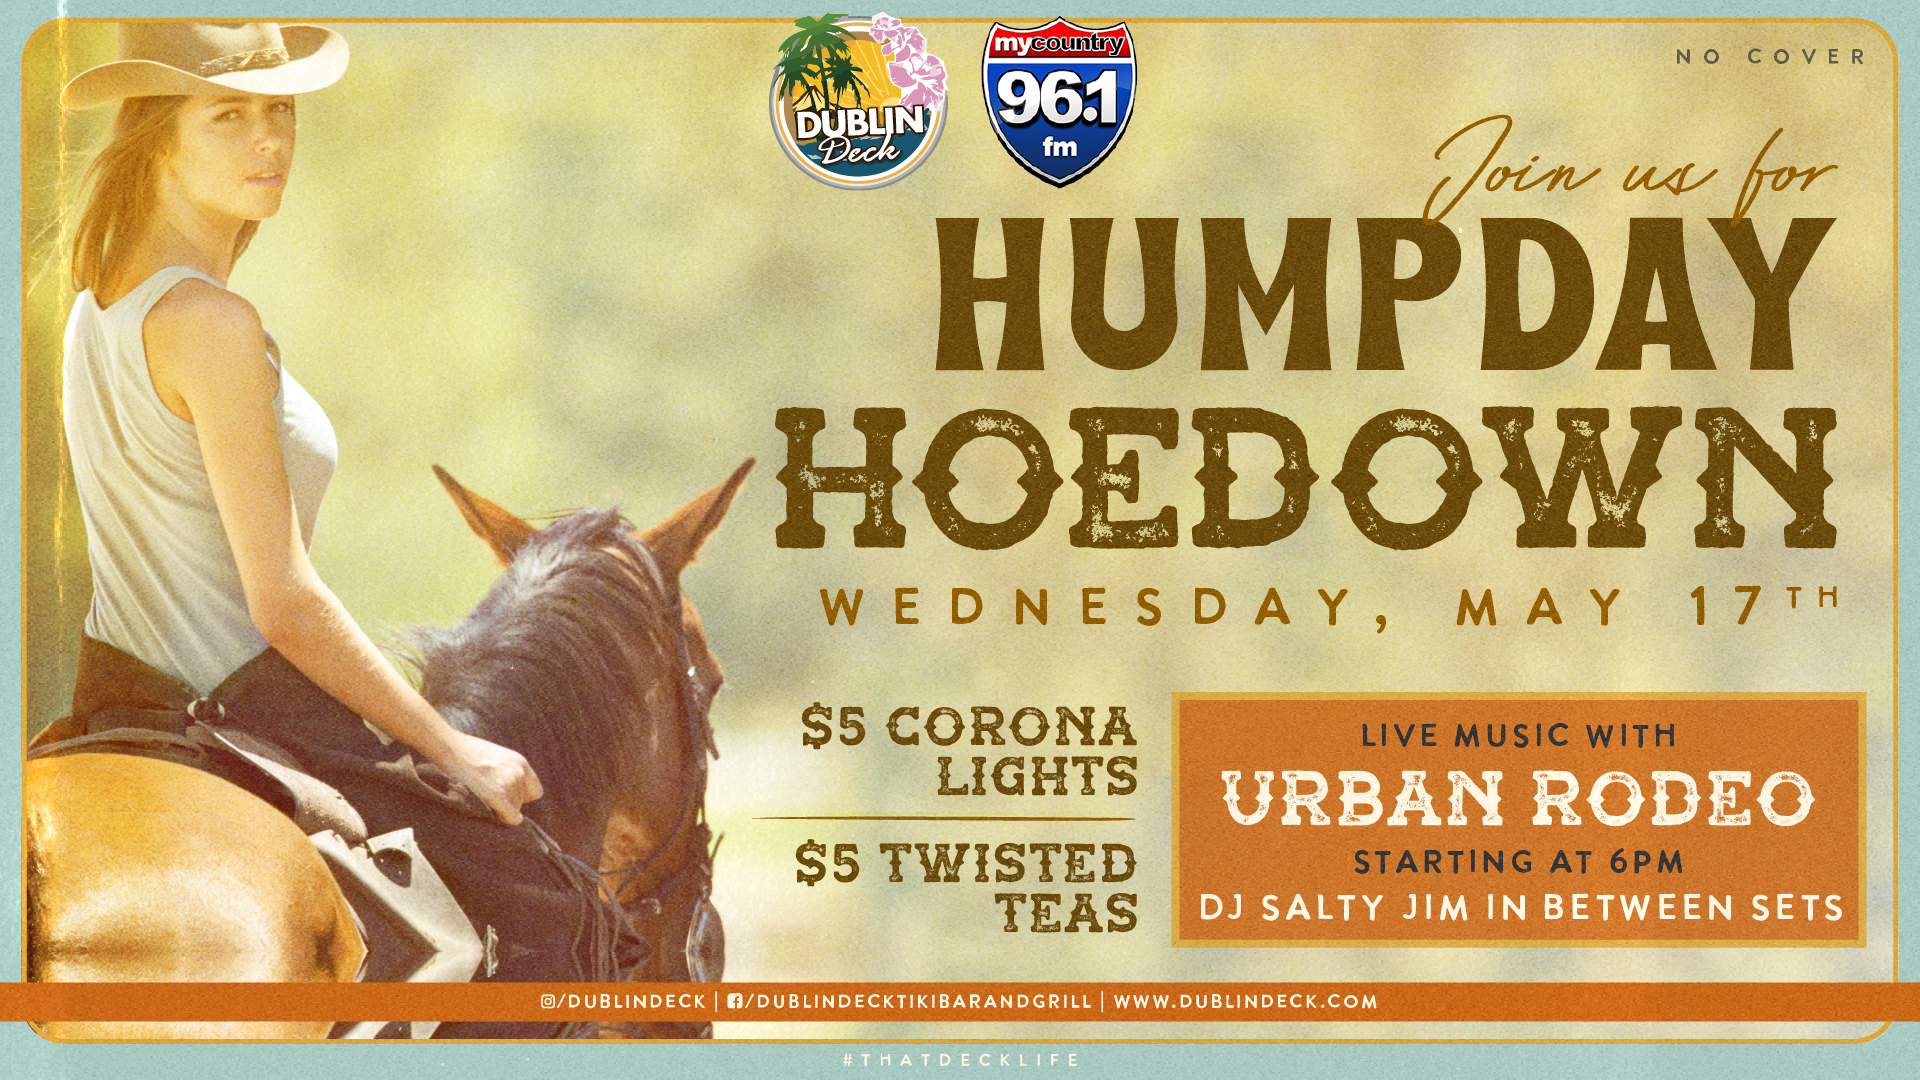 Get your cowboy boots on and head to Dublin Deck for Humpday Hoedown with Urban Rodeo! Music starts at 6PM